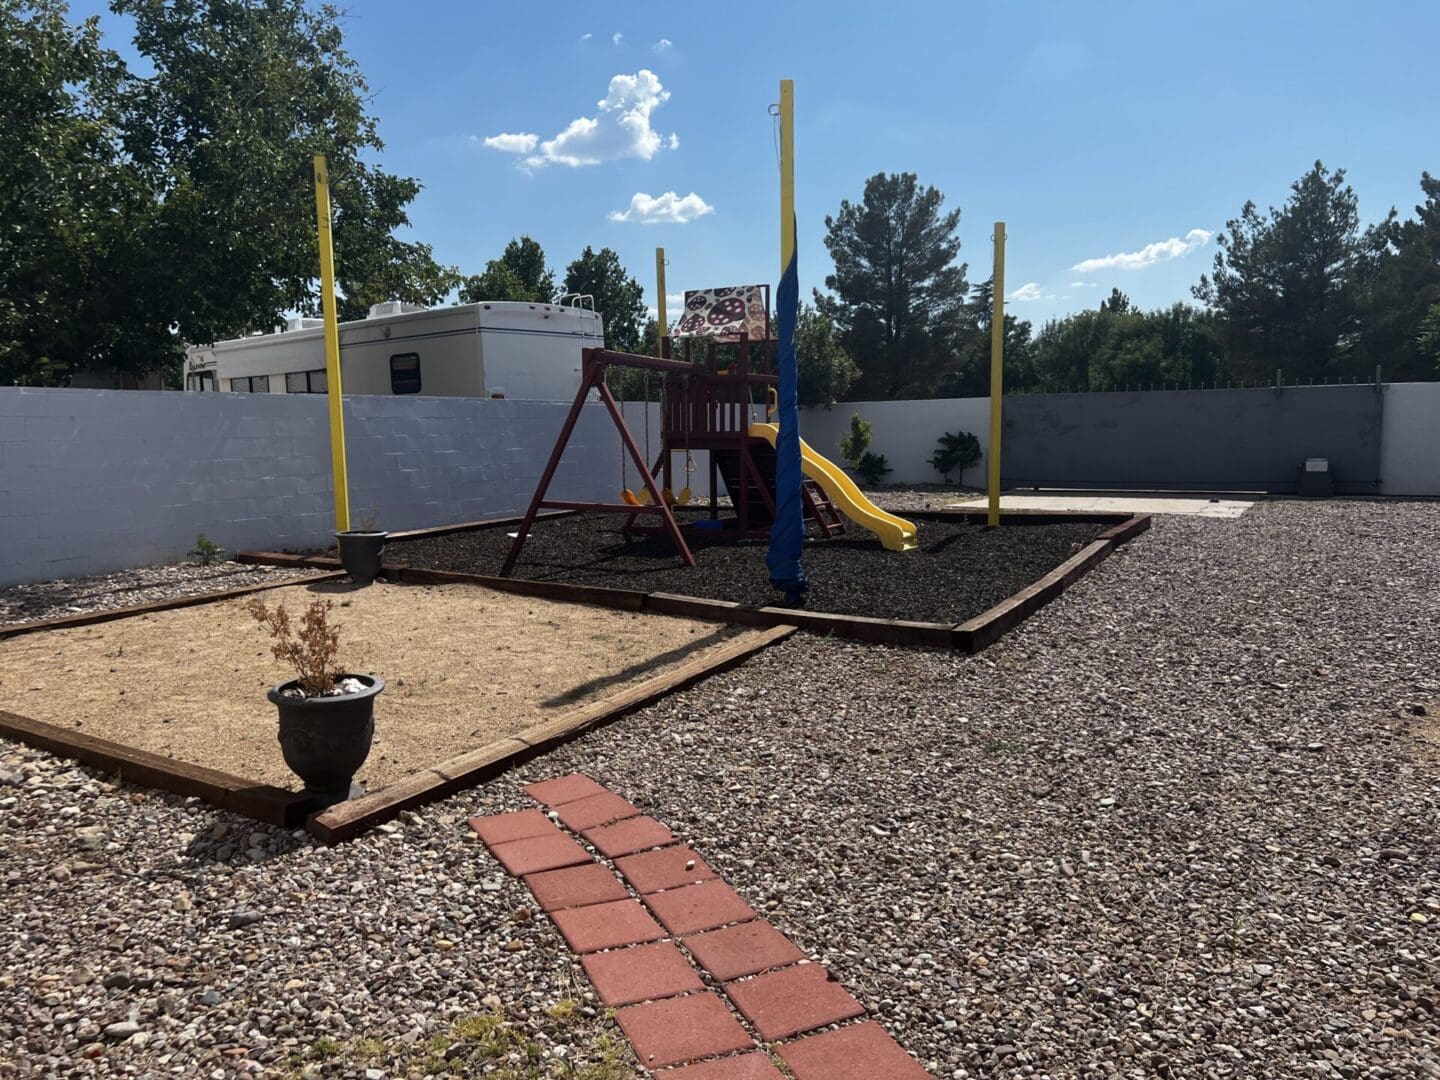 A playground with swings and slides in the yard.